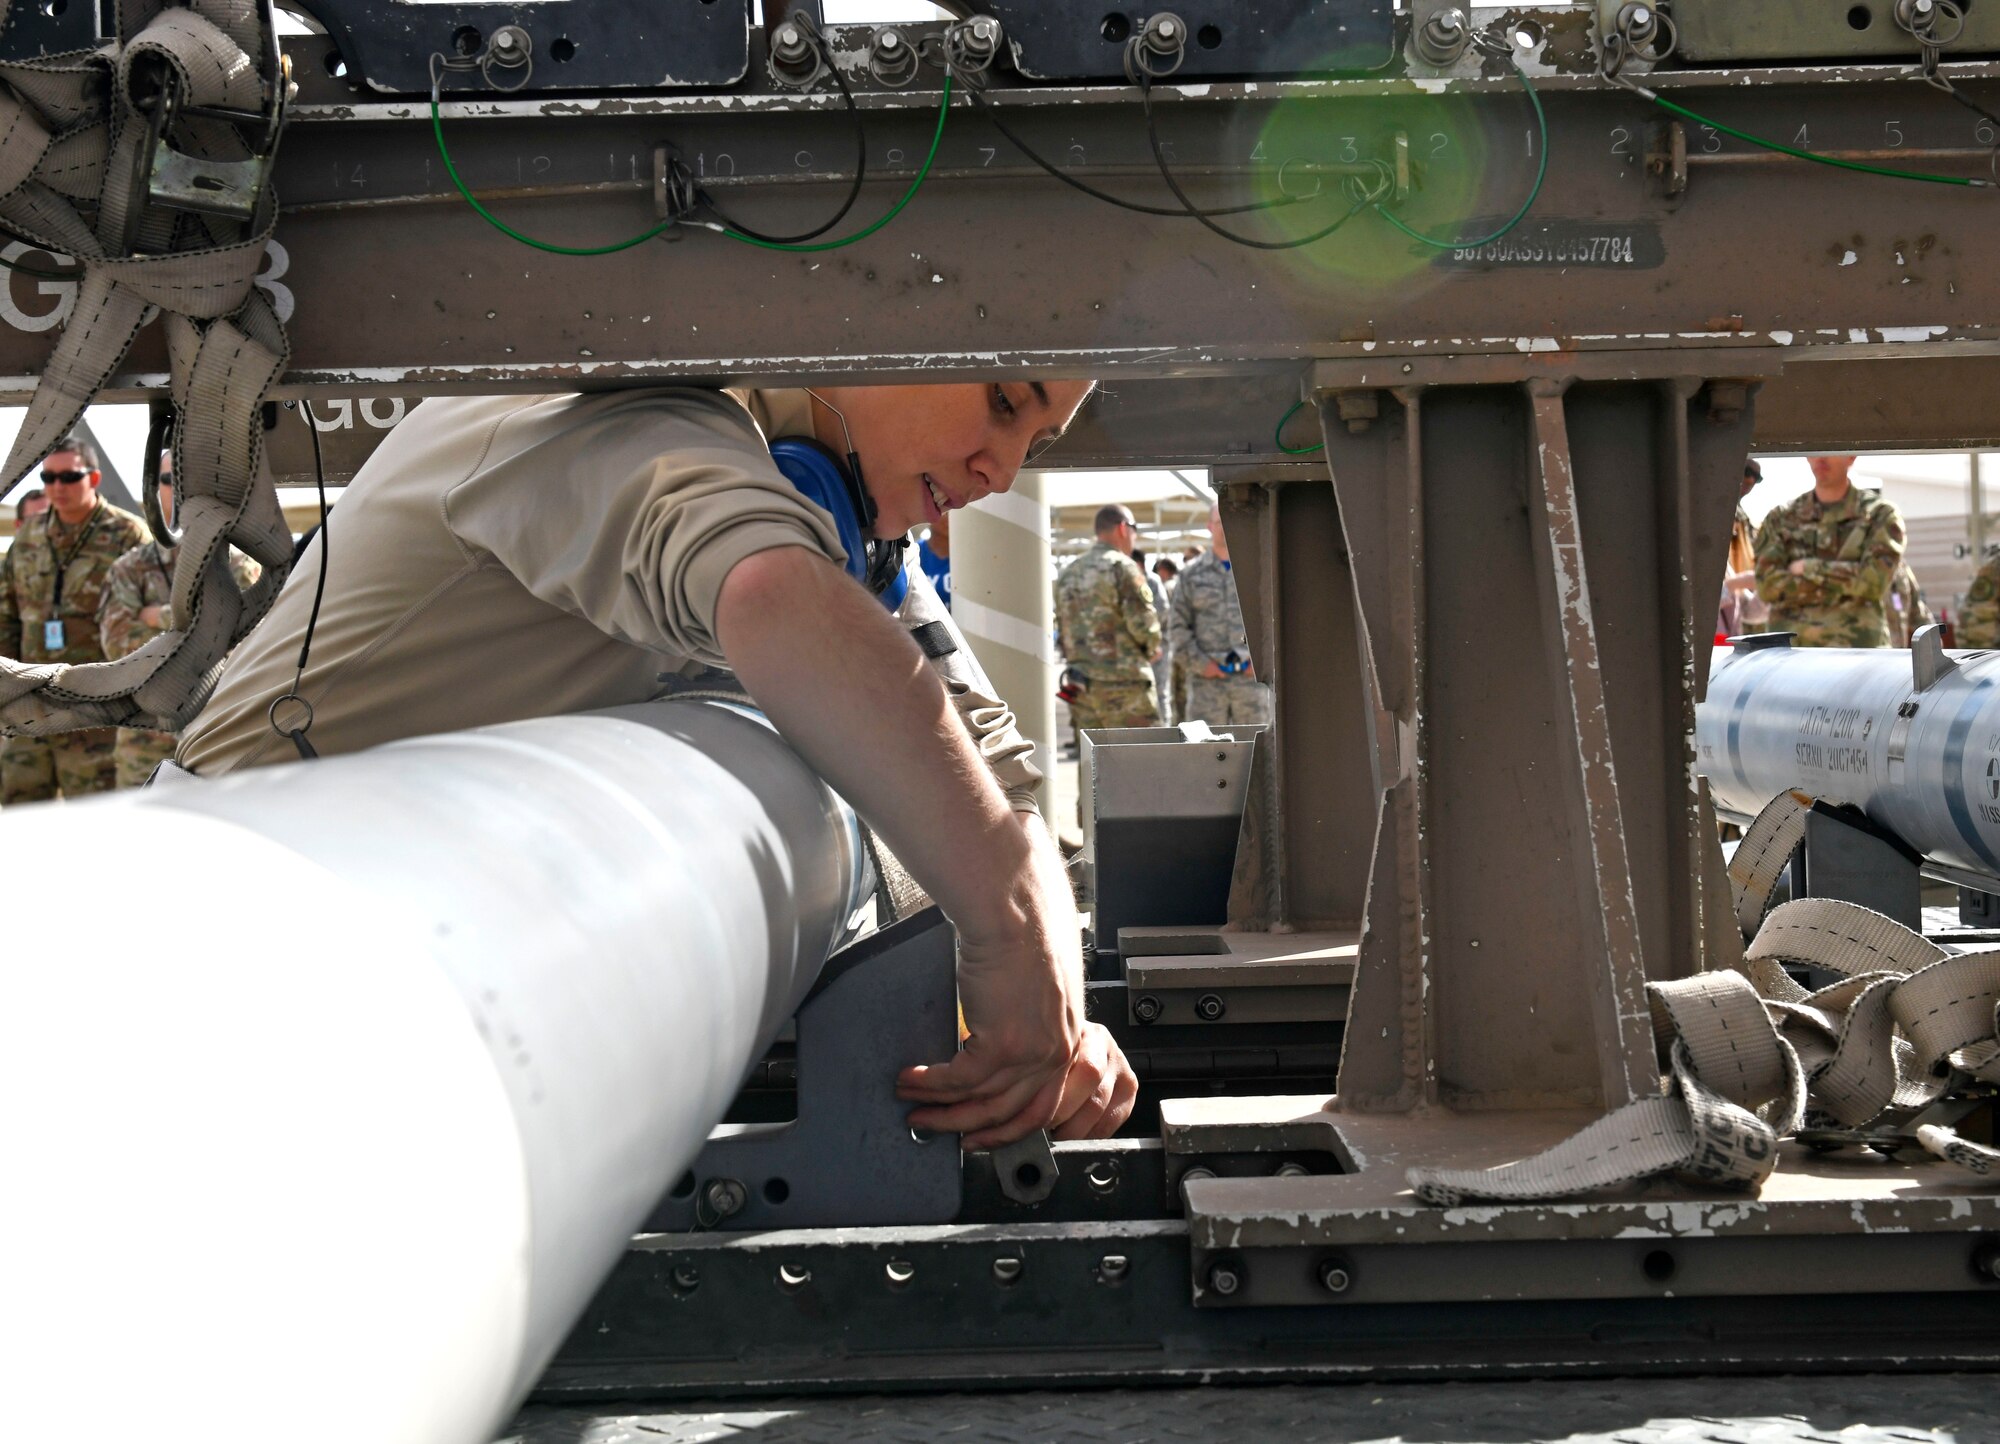 Senior Airman Dorothy Zurlinden, 61st Aircraft Maintenance Unit weapons load crew member, tightens a ratchet strap on an inert munition during the Annual Load Crew Competition Jan. 24, 2020, at Luke Air Force Base, Ariz.